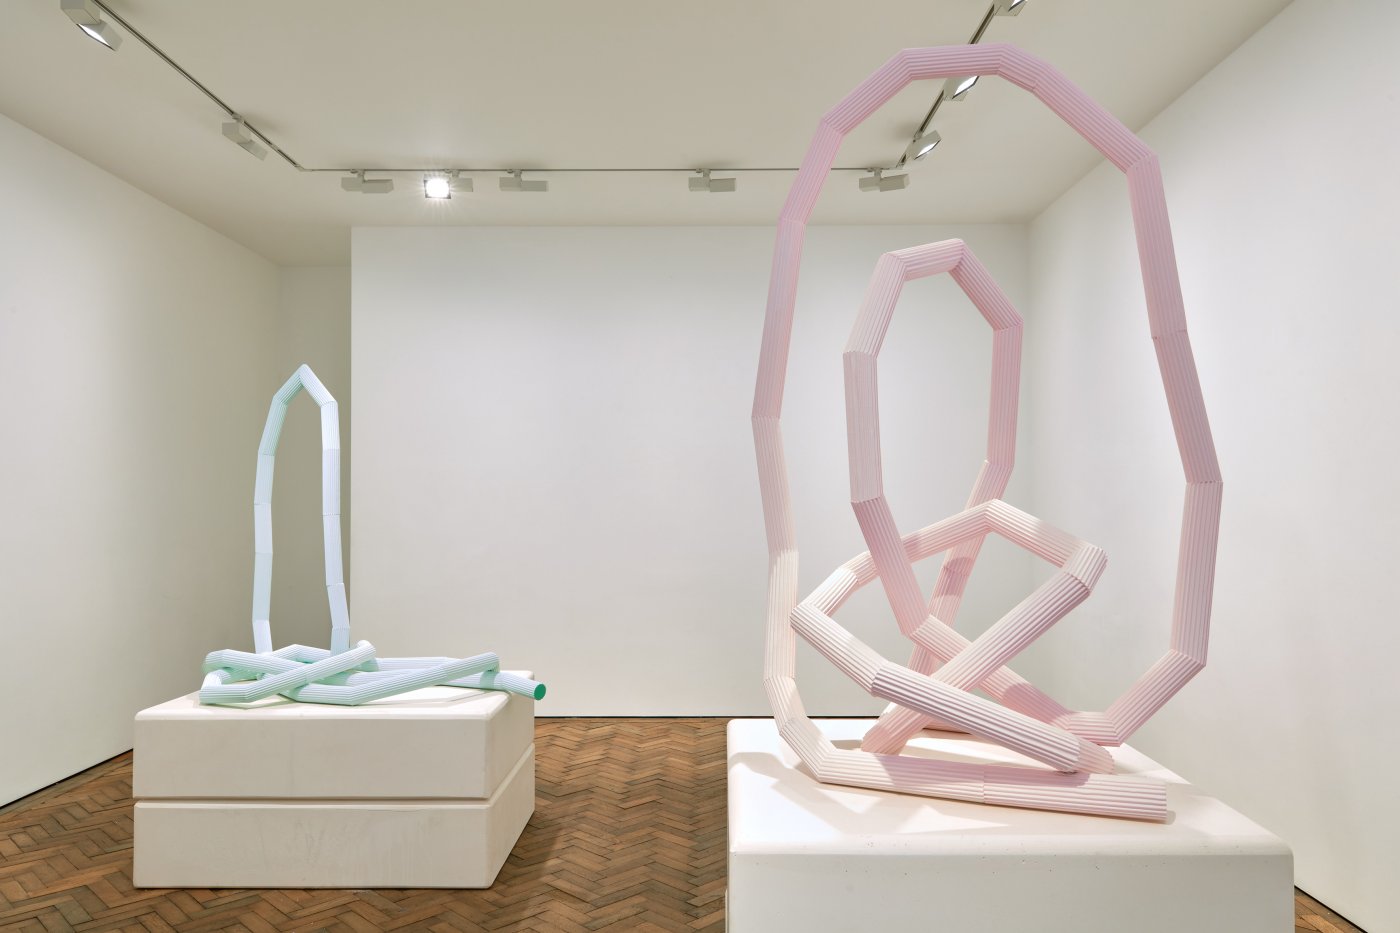 Installation image for Eva Rothschild: Our Life, Our Sweetness and Our Hope, at Modern Art